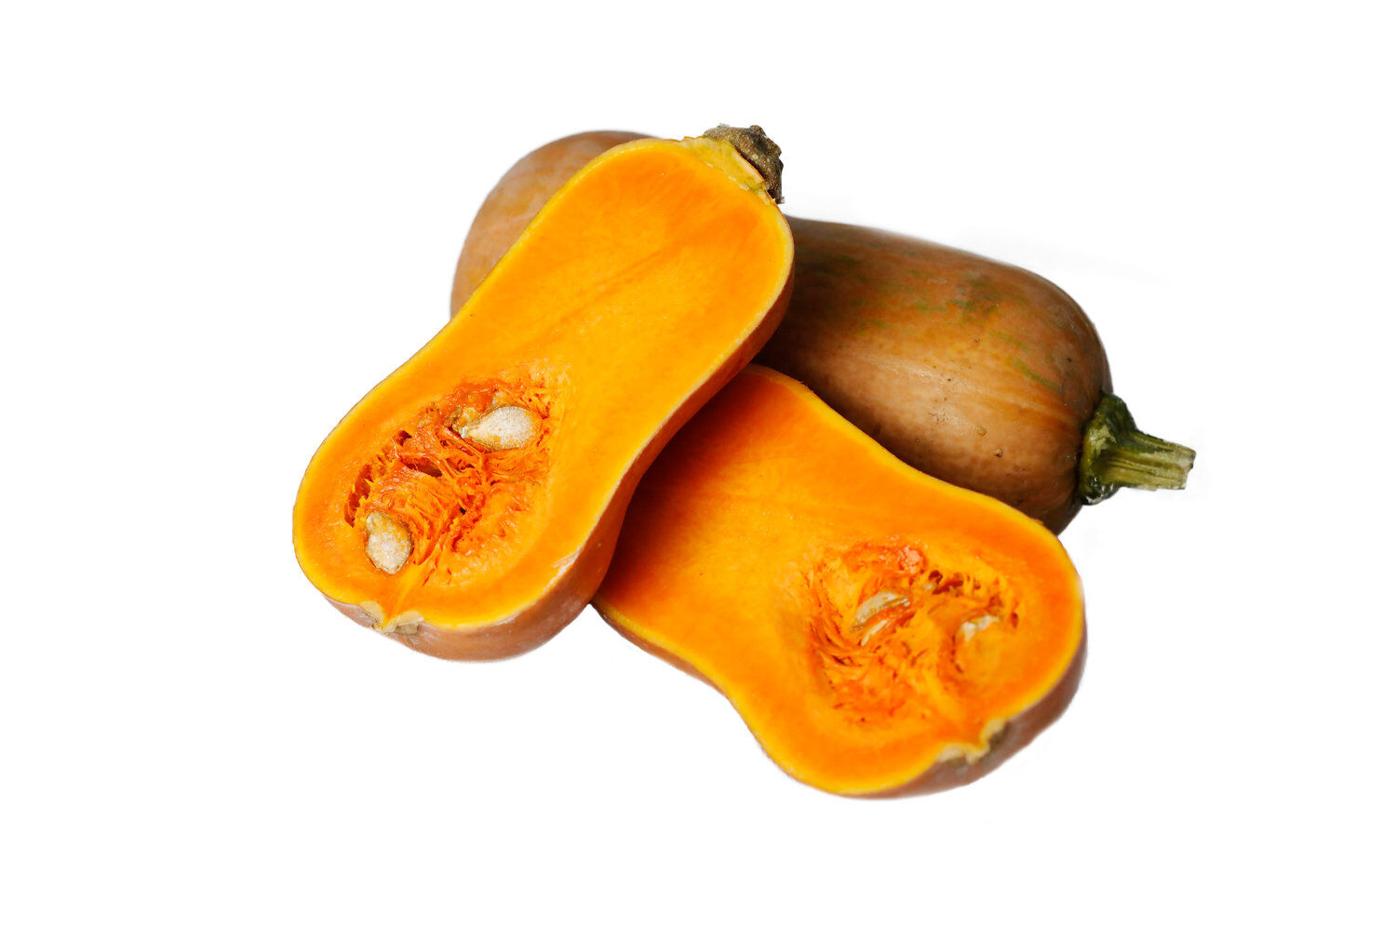 Tips for getting the most out seasonal squash